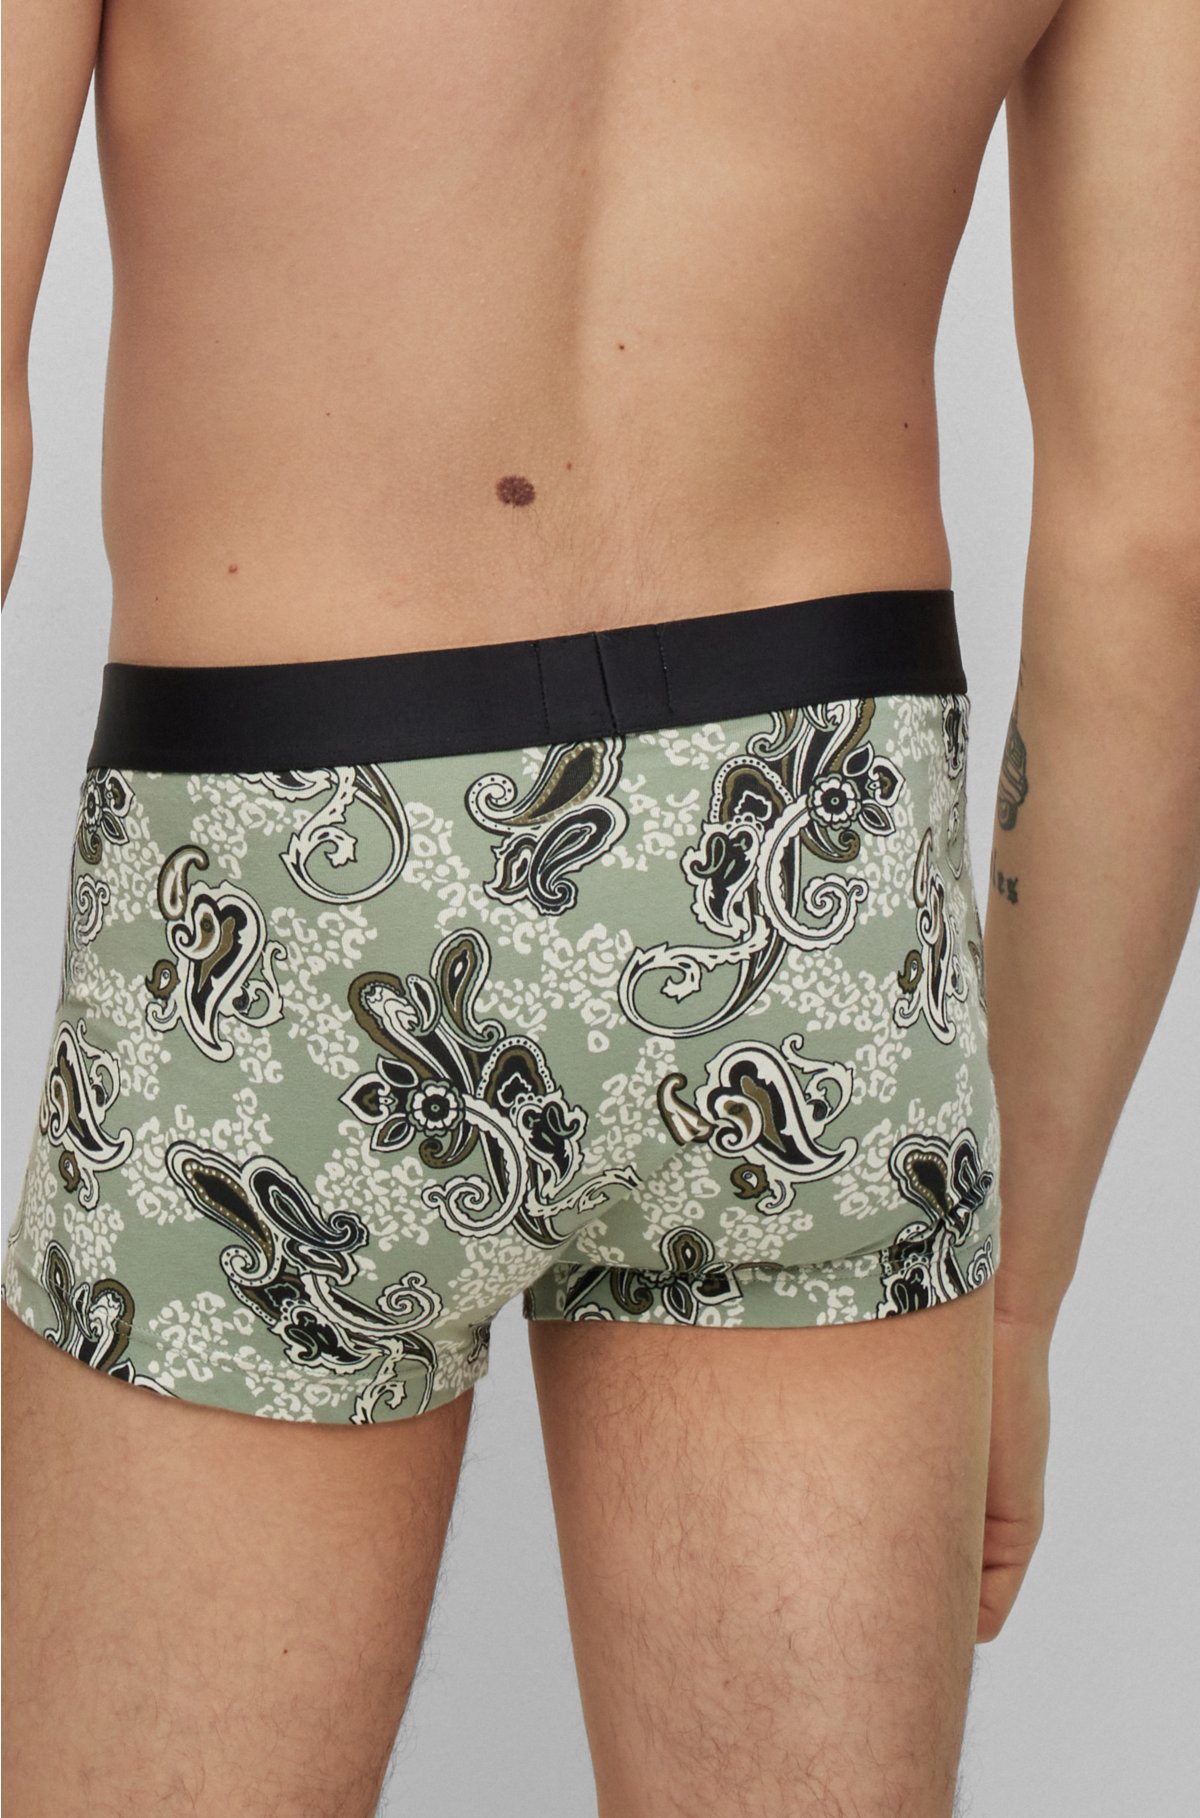 HUGO - Two-pack of stretch-cotton trunks with logo waistbands